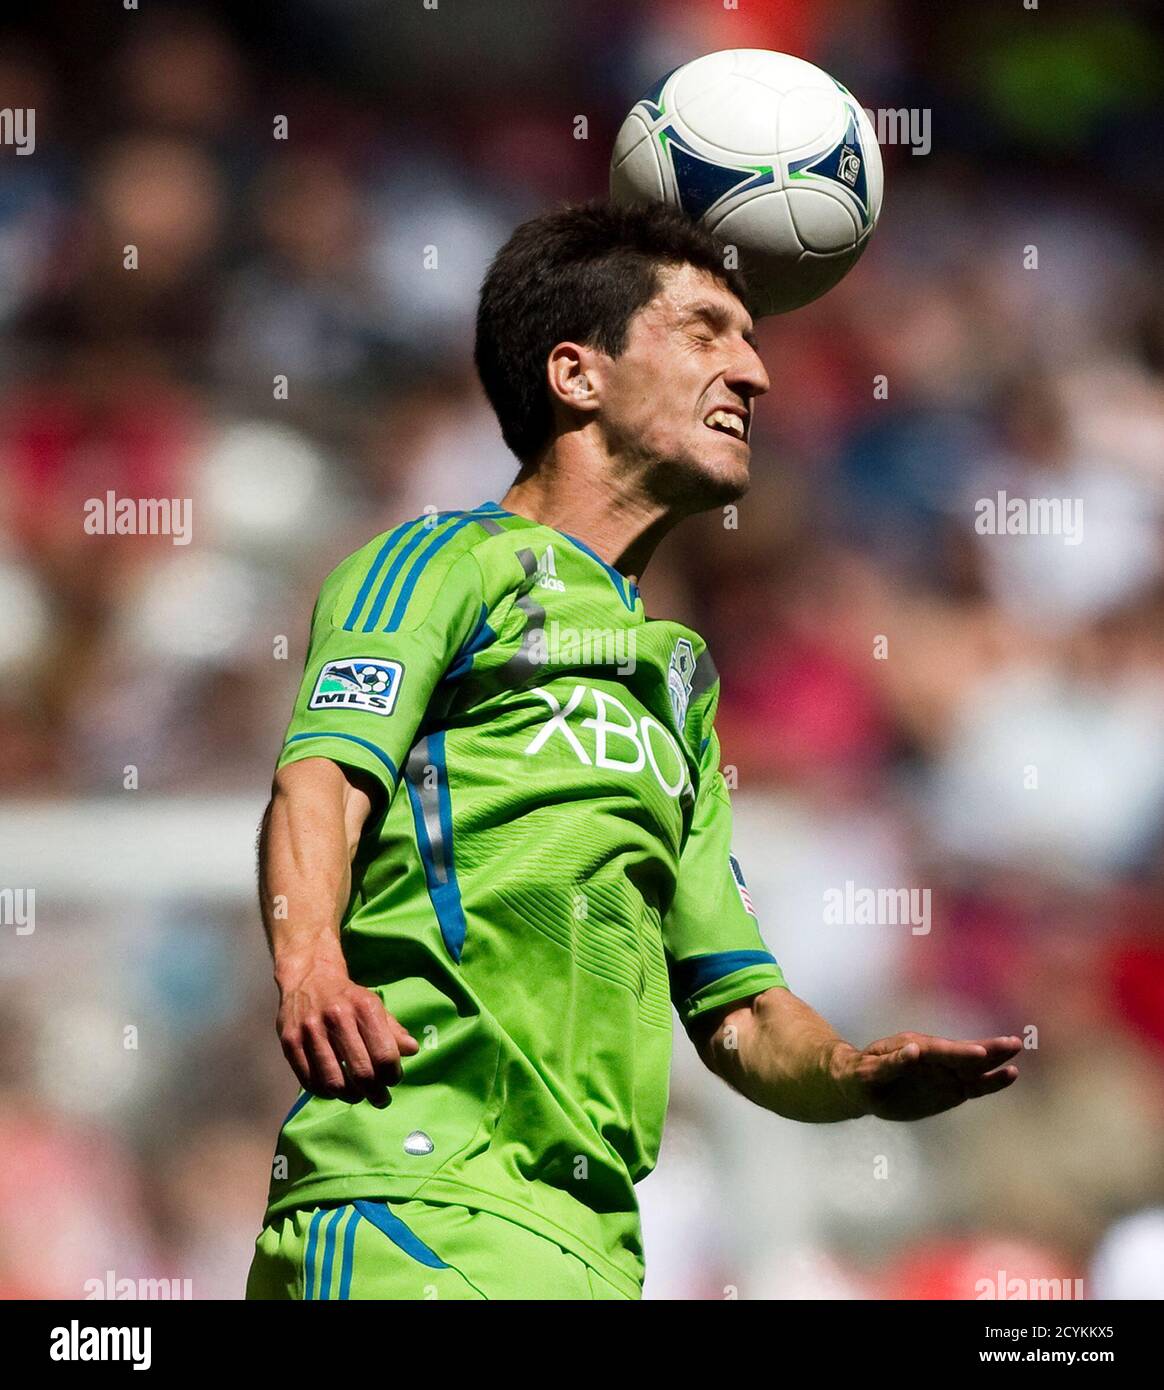 Seattle Sounders' Alvaro Fernandez heads the ball against while playing the Vancouver Whitecaps during the first half of their MLS soccer game in Vancouver, British Columbia May 19, 2012.   REUTERS/Ben Nelms    (CANADA - Tags: SPORT SOCCER) Stock Photo